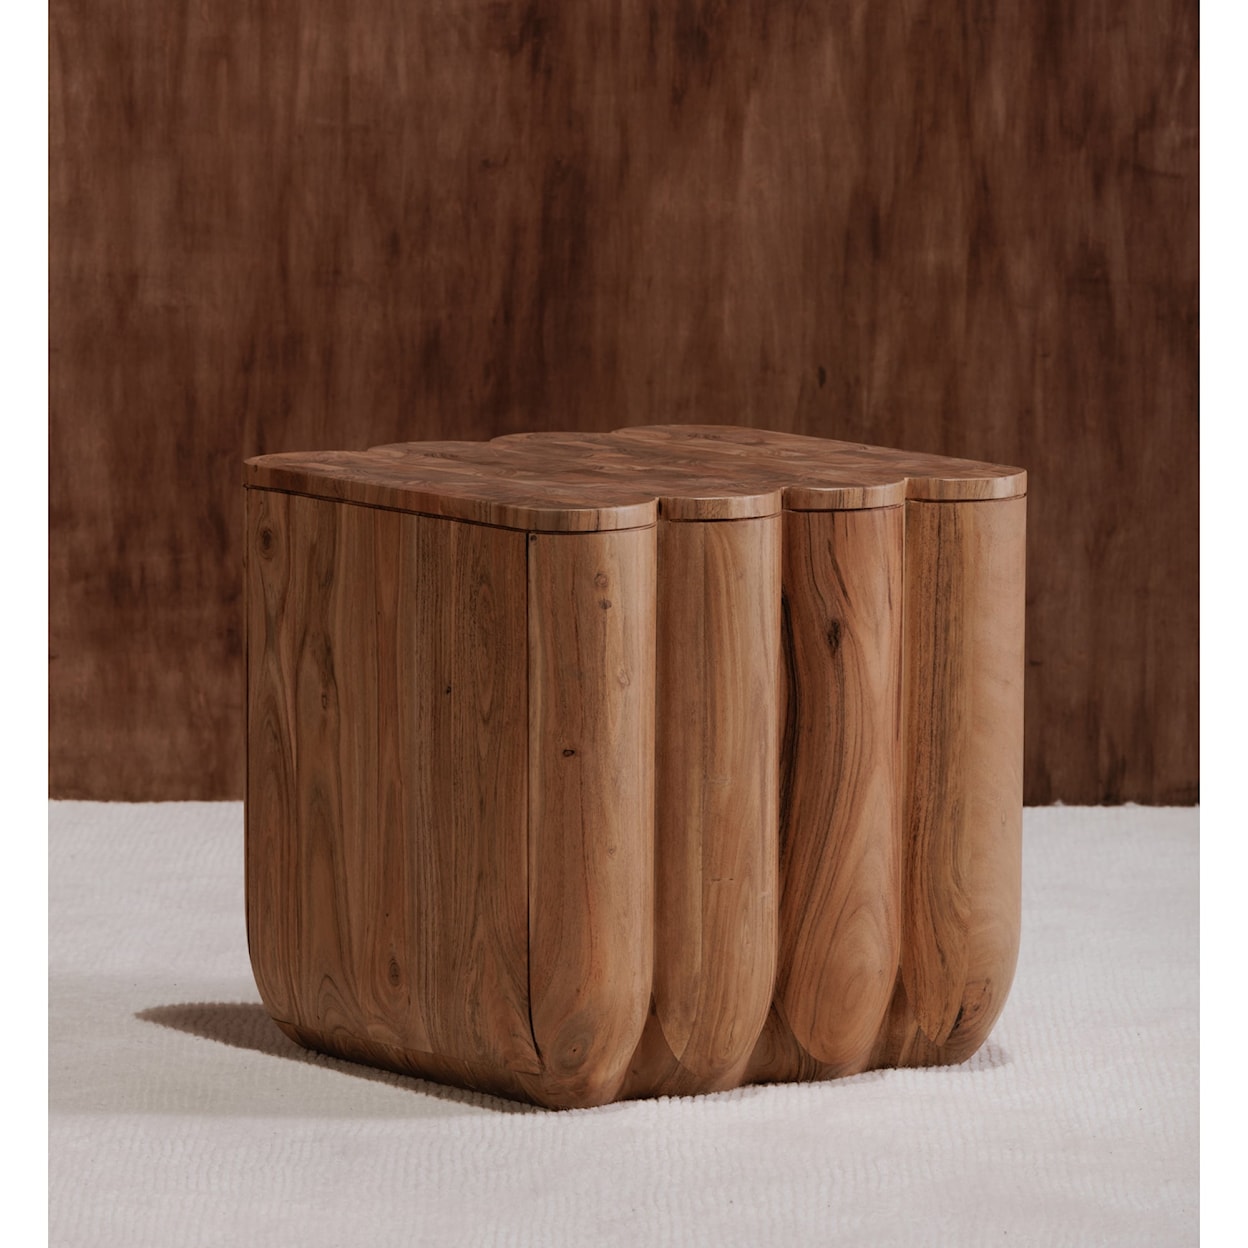 Moe's Home Collection Punyo Punyo Accent Table